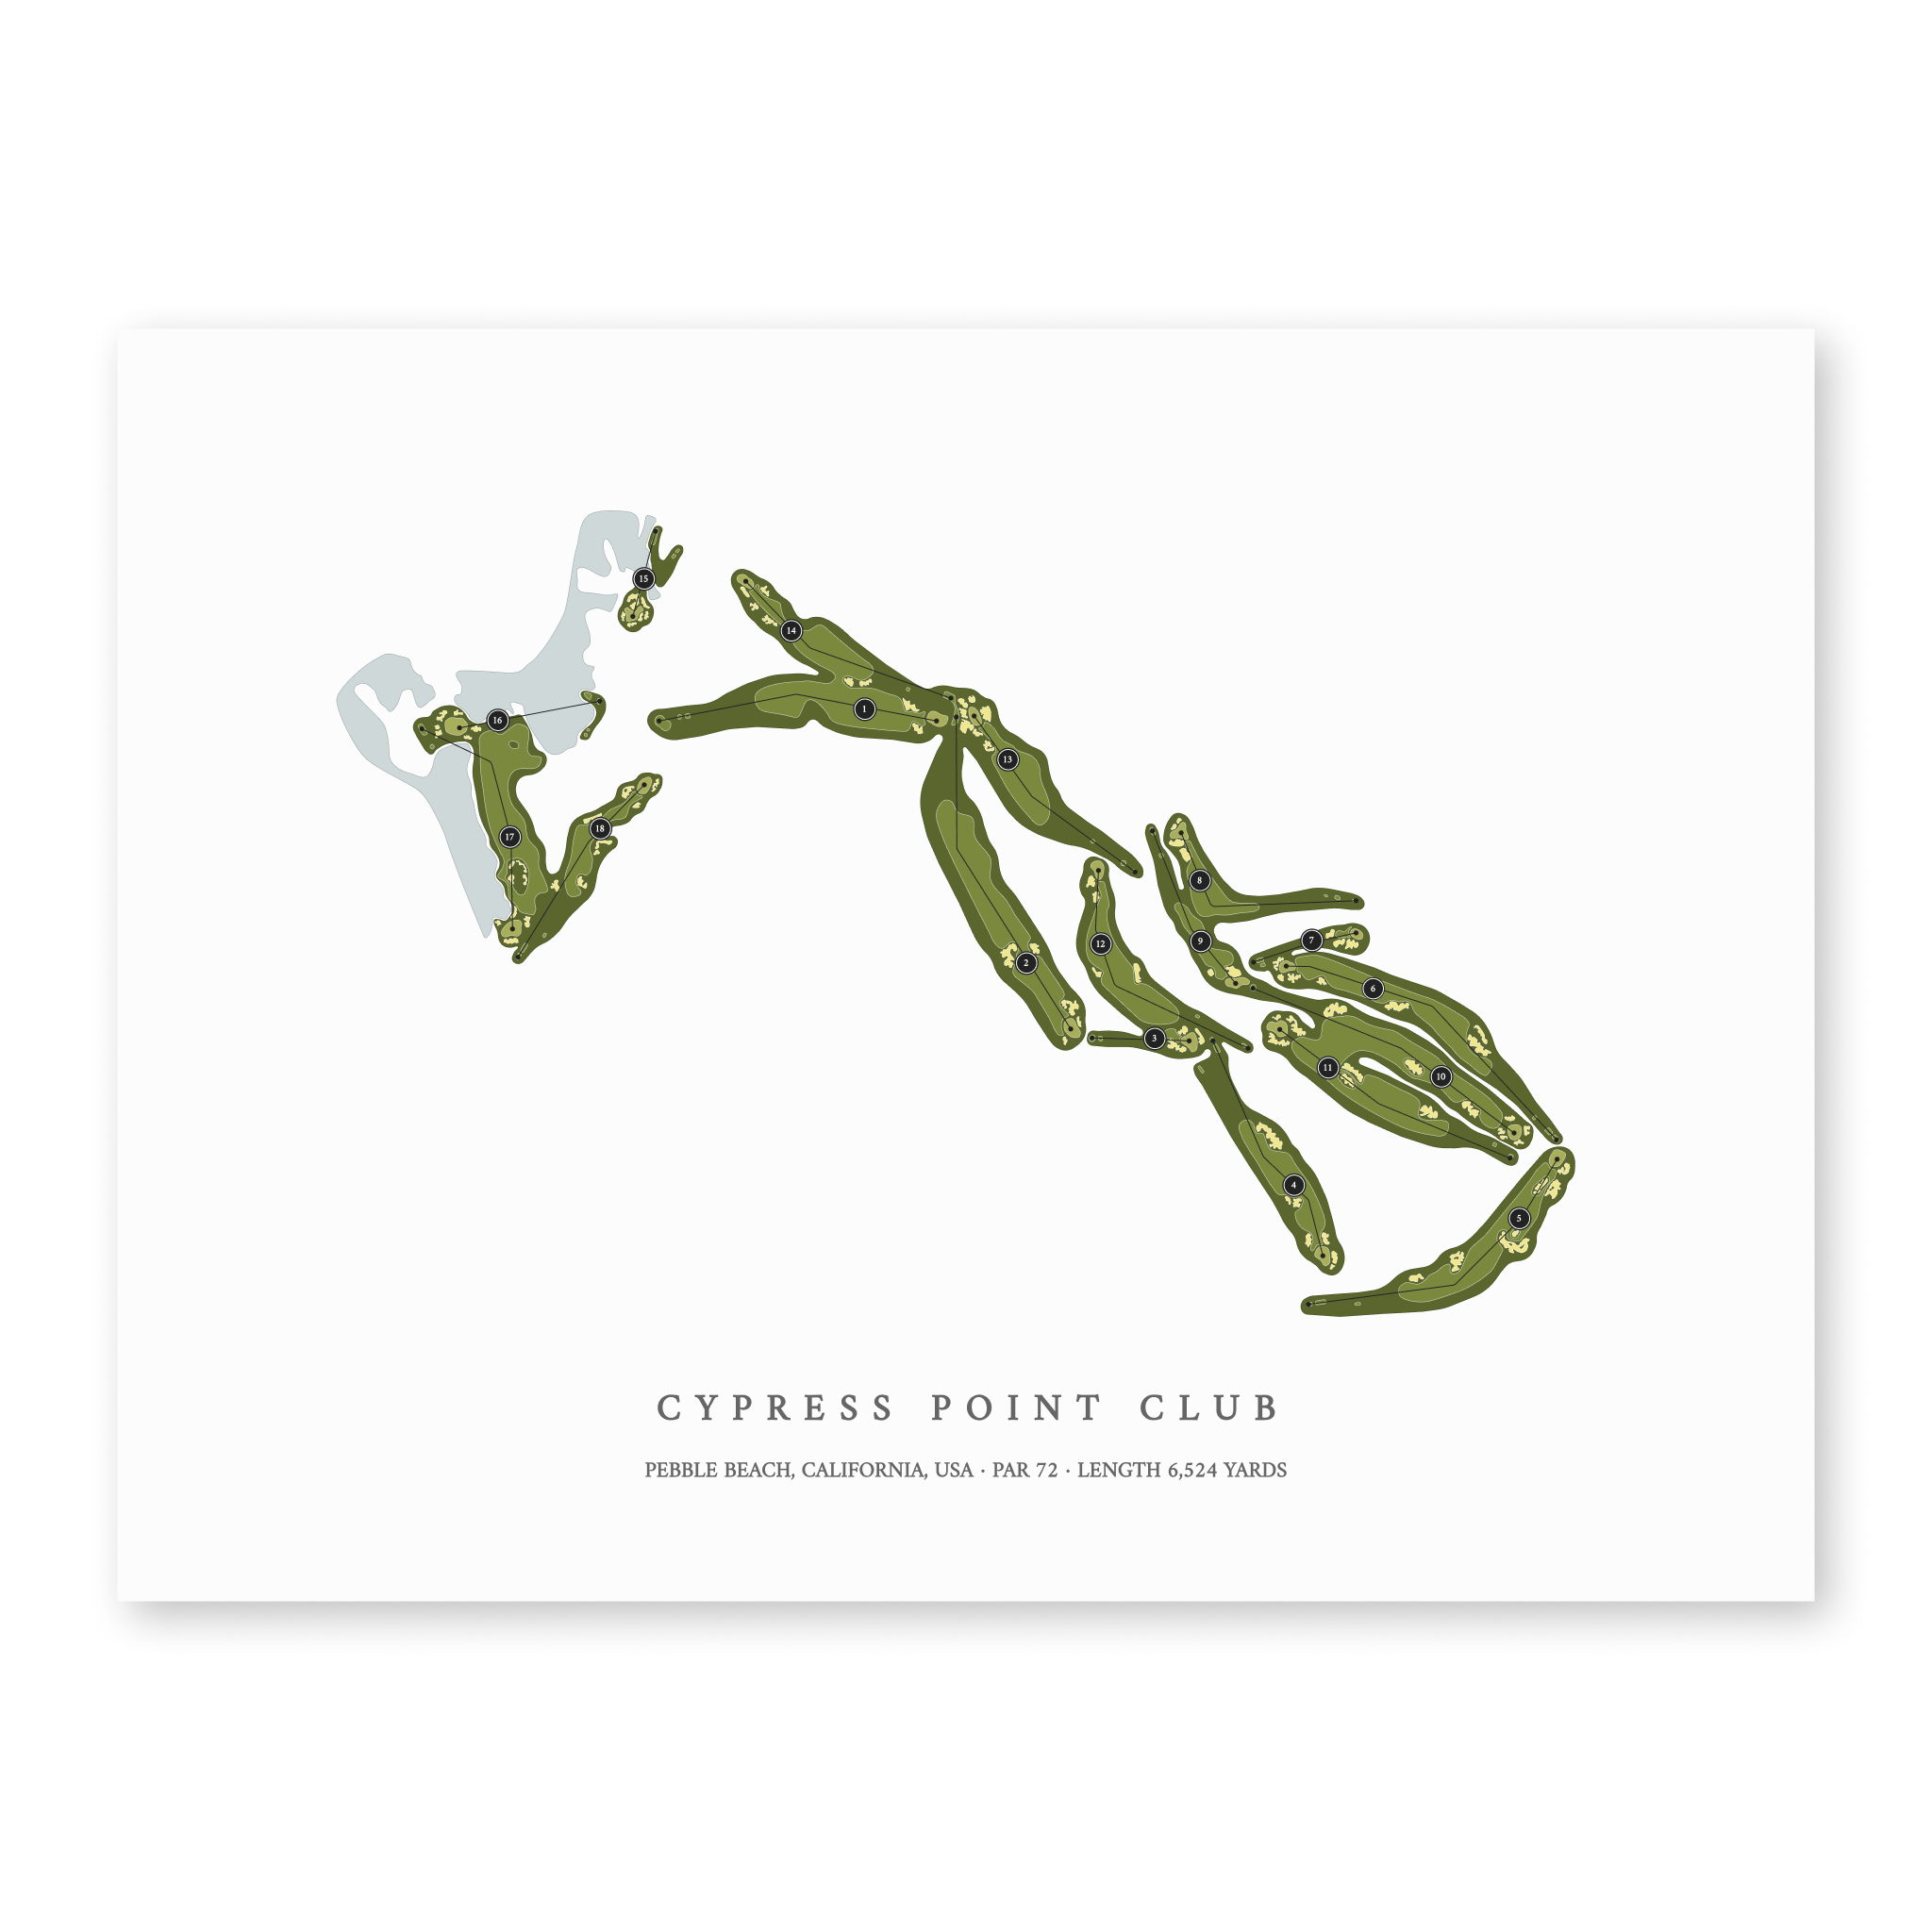 Cypress Point Club| Golf Course Print | Unframed With Hole Numbers #hole numbers_yes